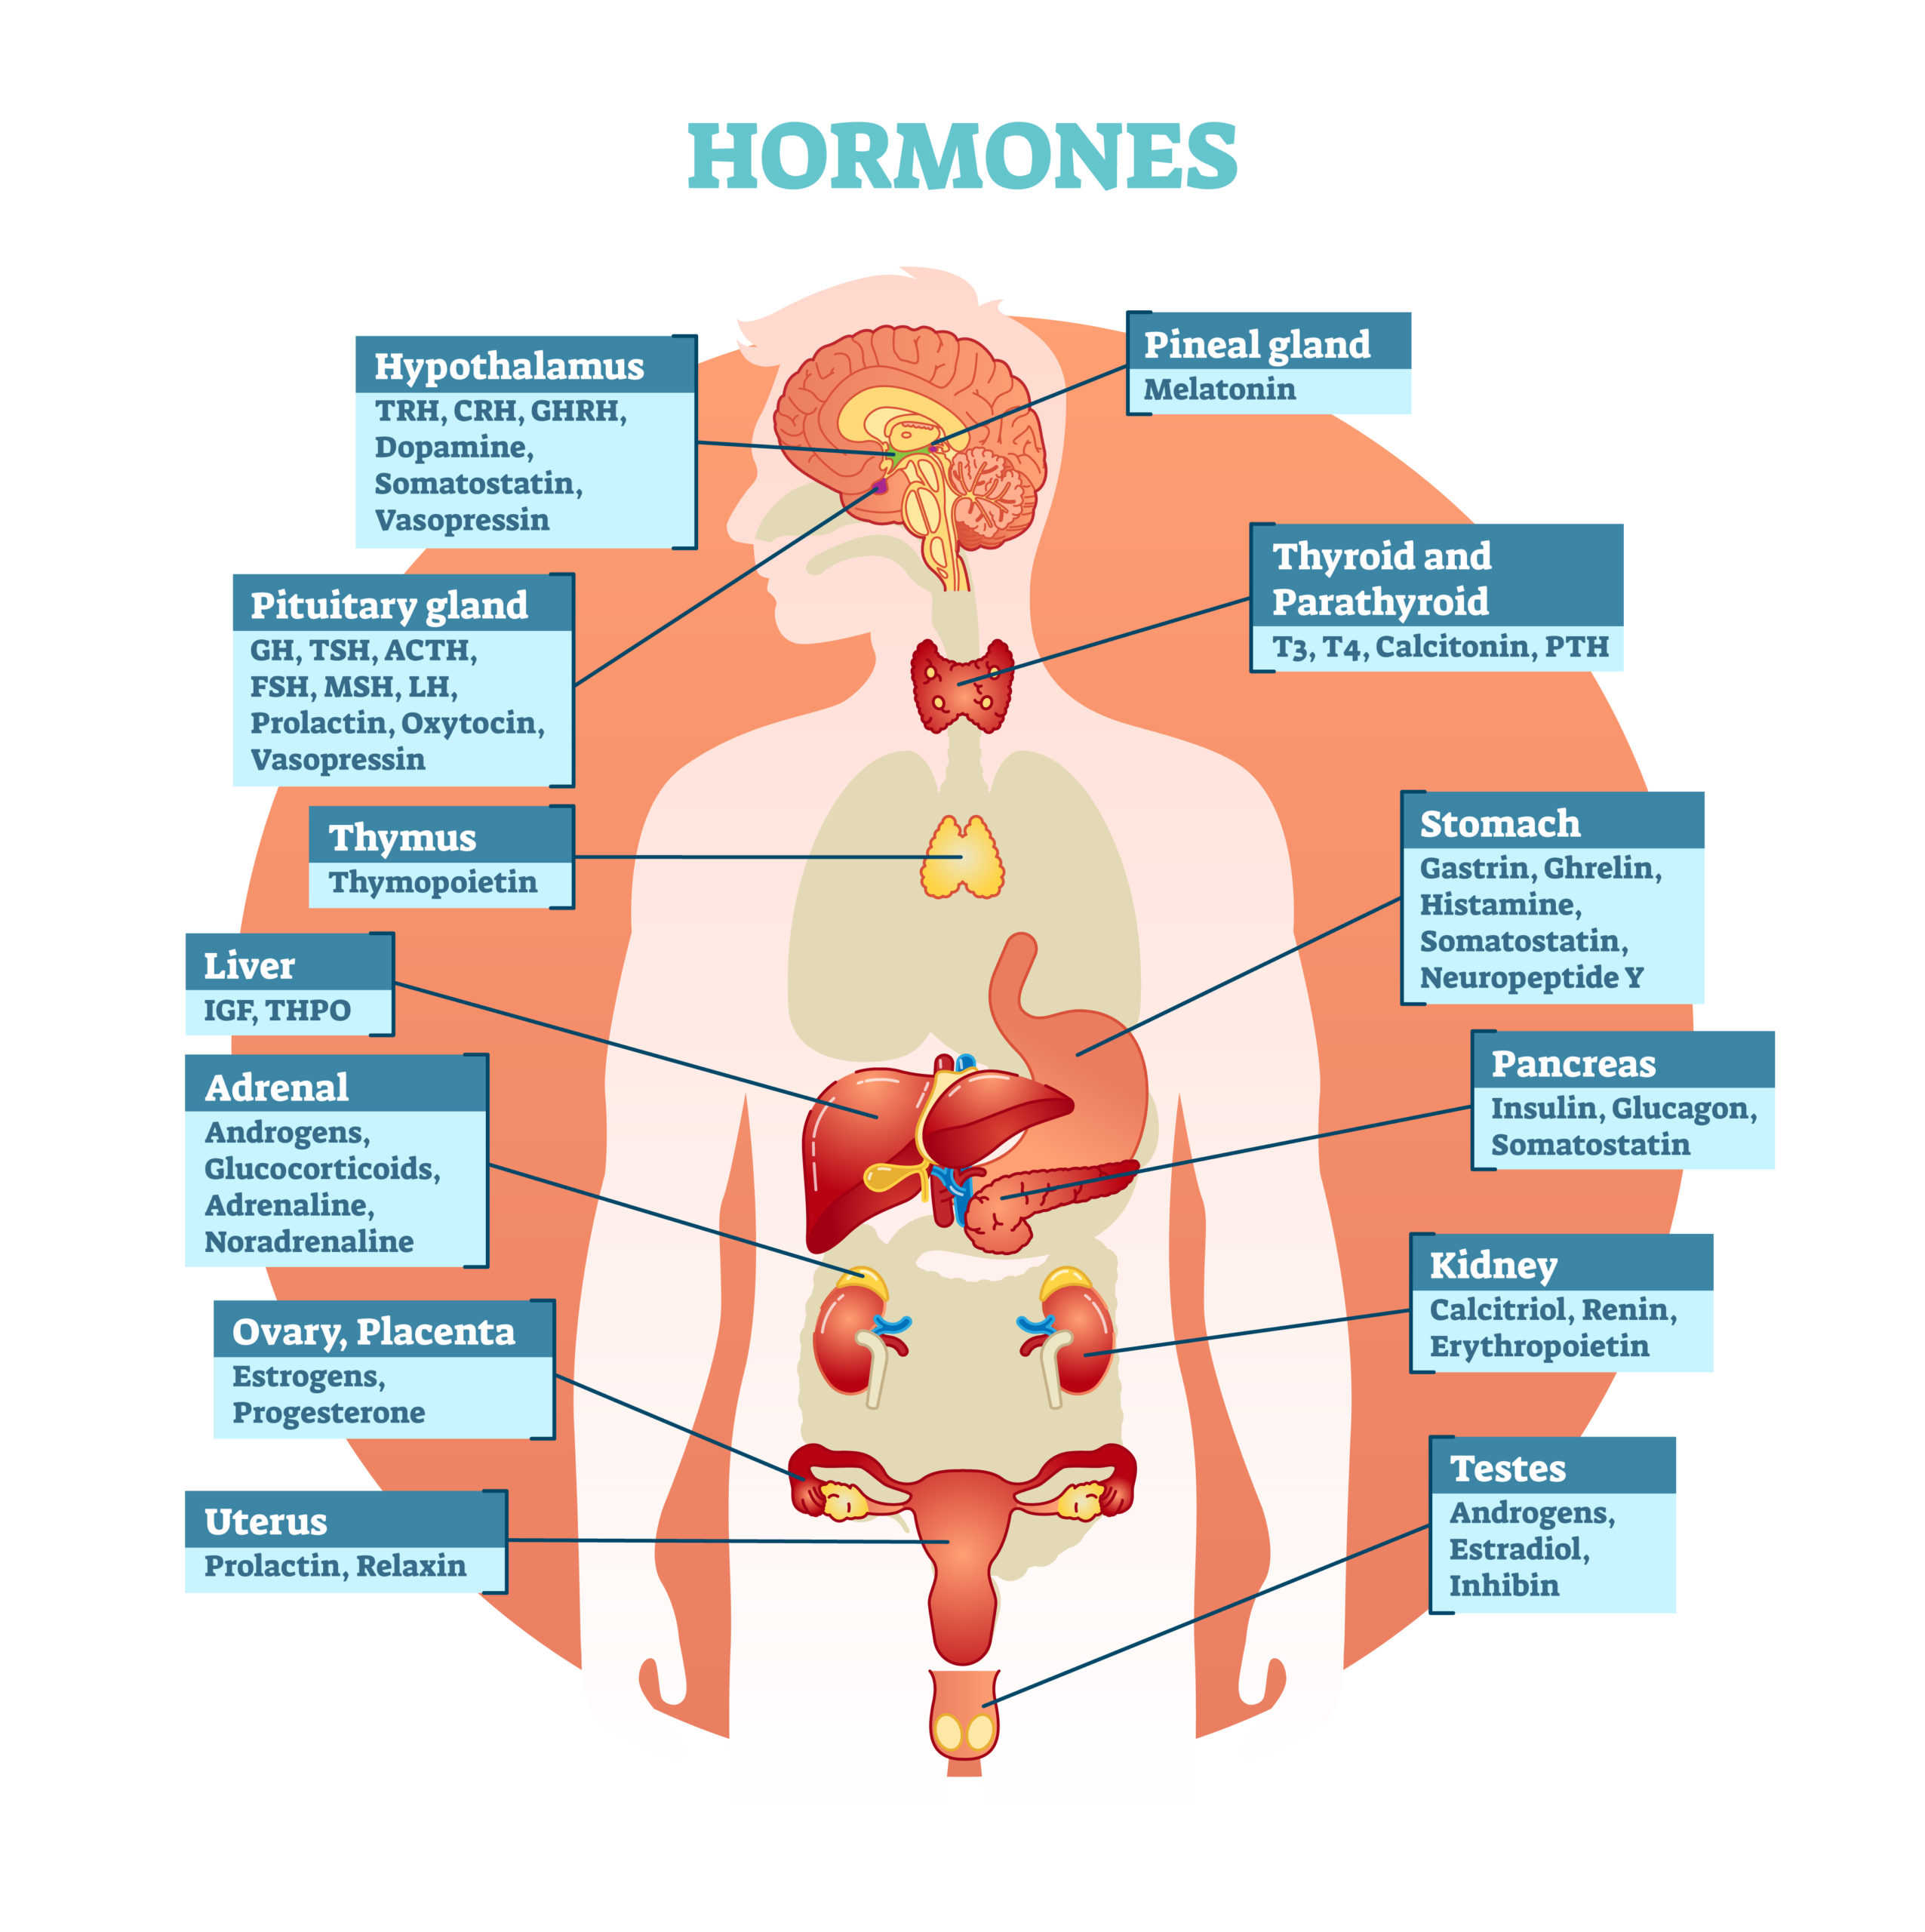 Gastrin and Ghrelin are hormones made in the stomach